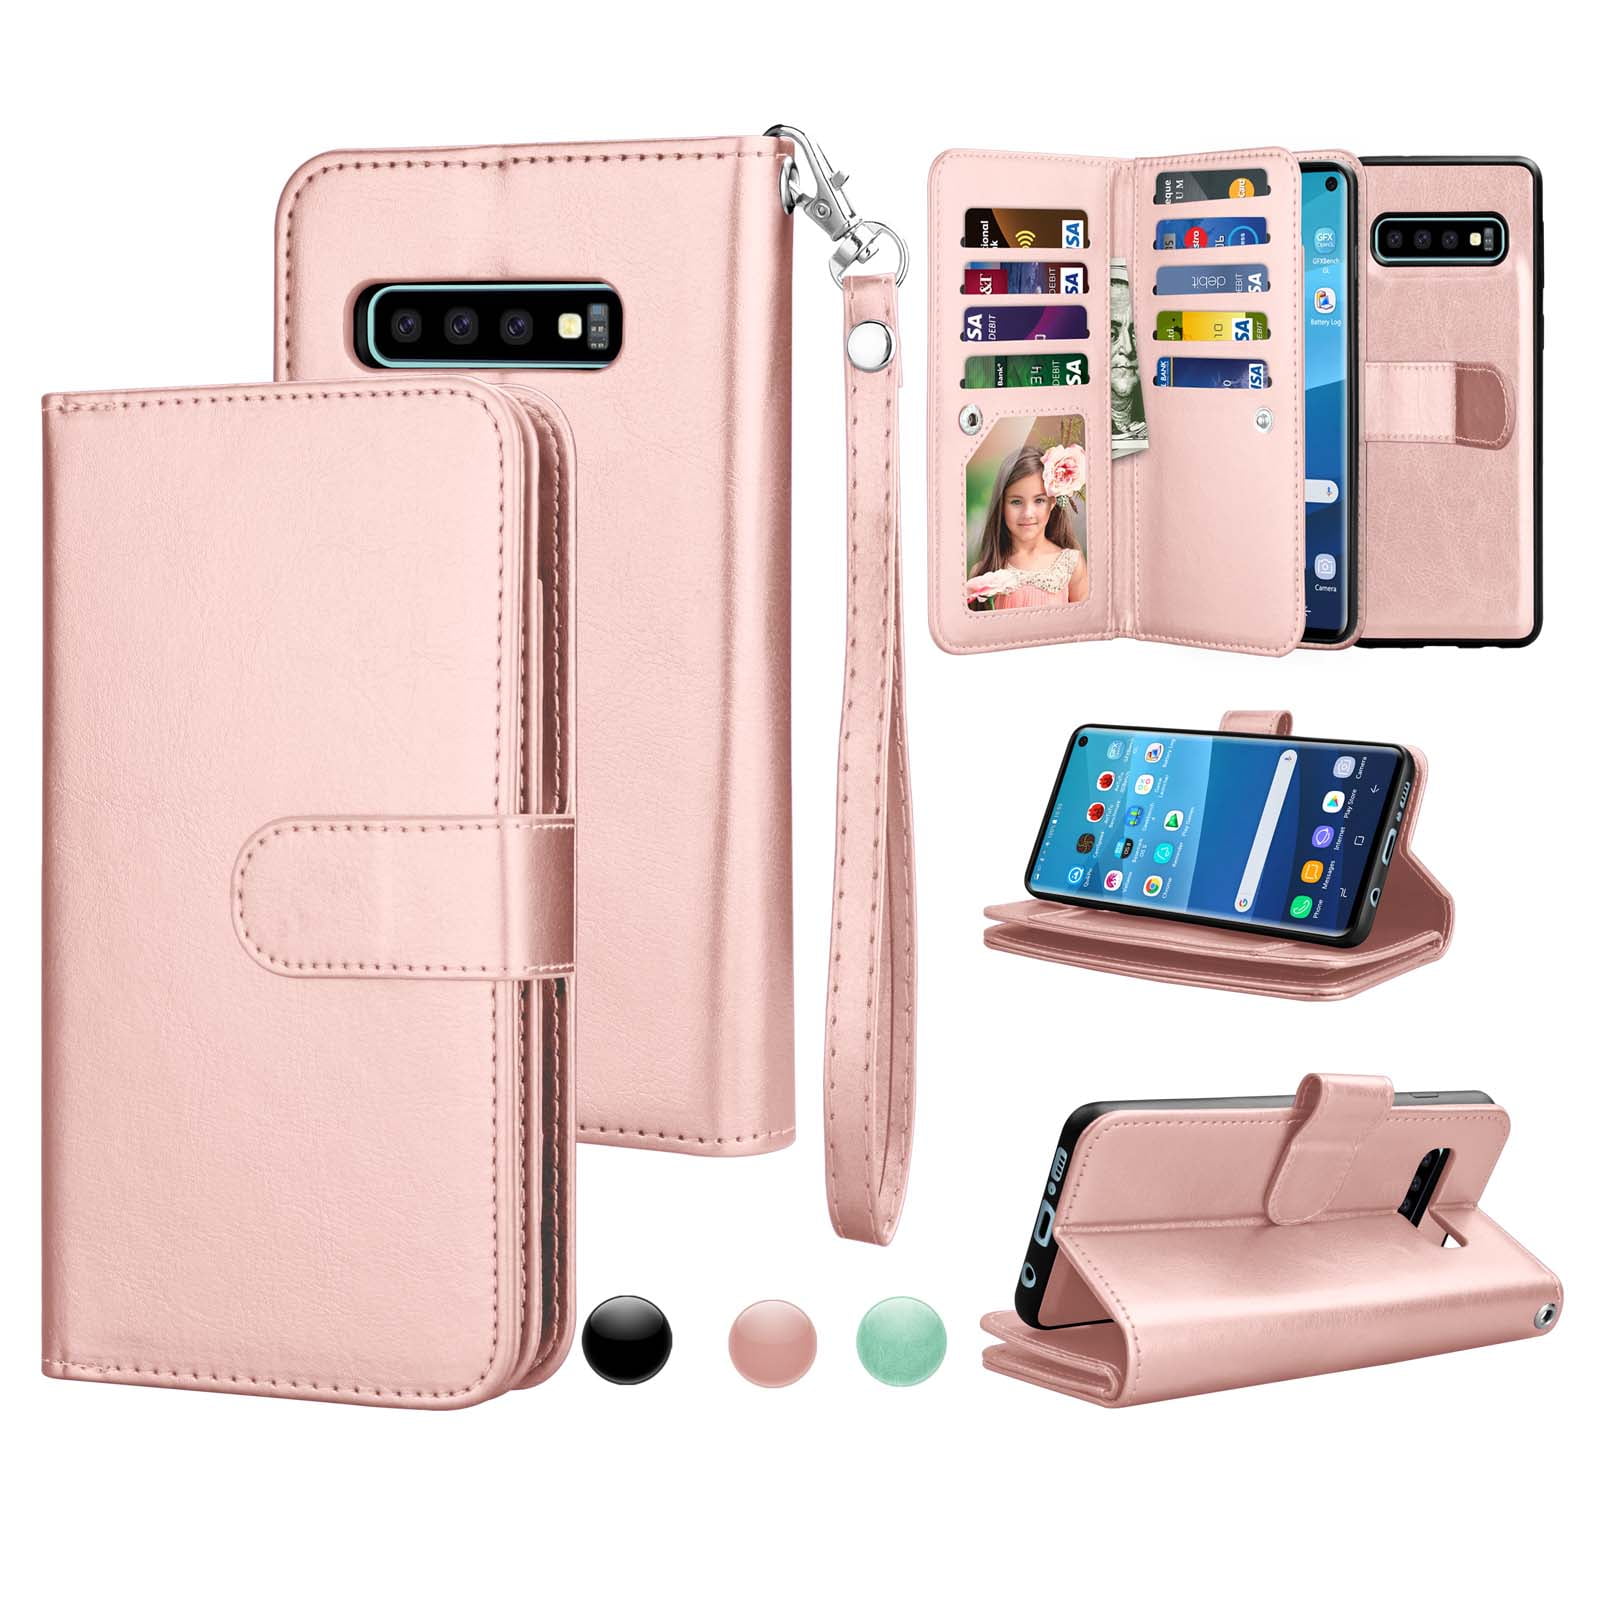 Kickstand Extra-Durable Card Holders Wallet Cover for Samsung Galaxy S10 Leather Flip Case Fit for Samsung Galaxy S10 